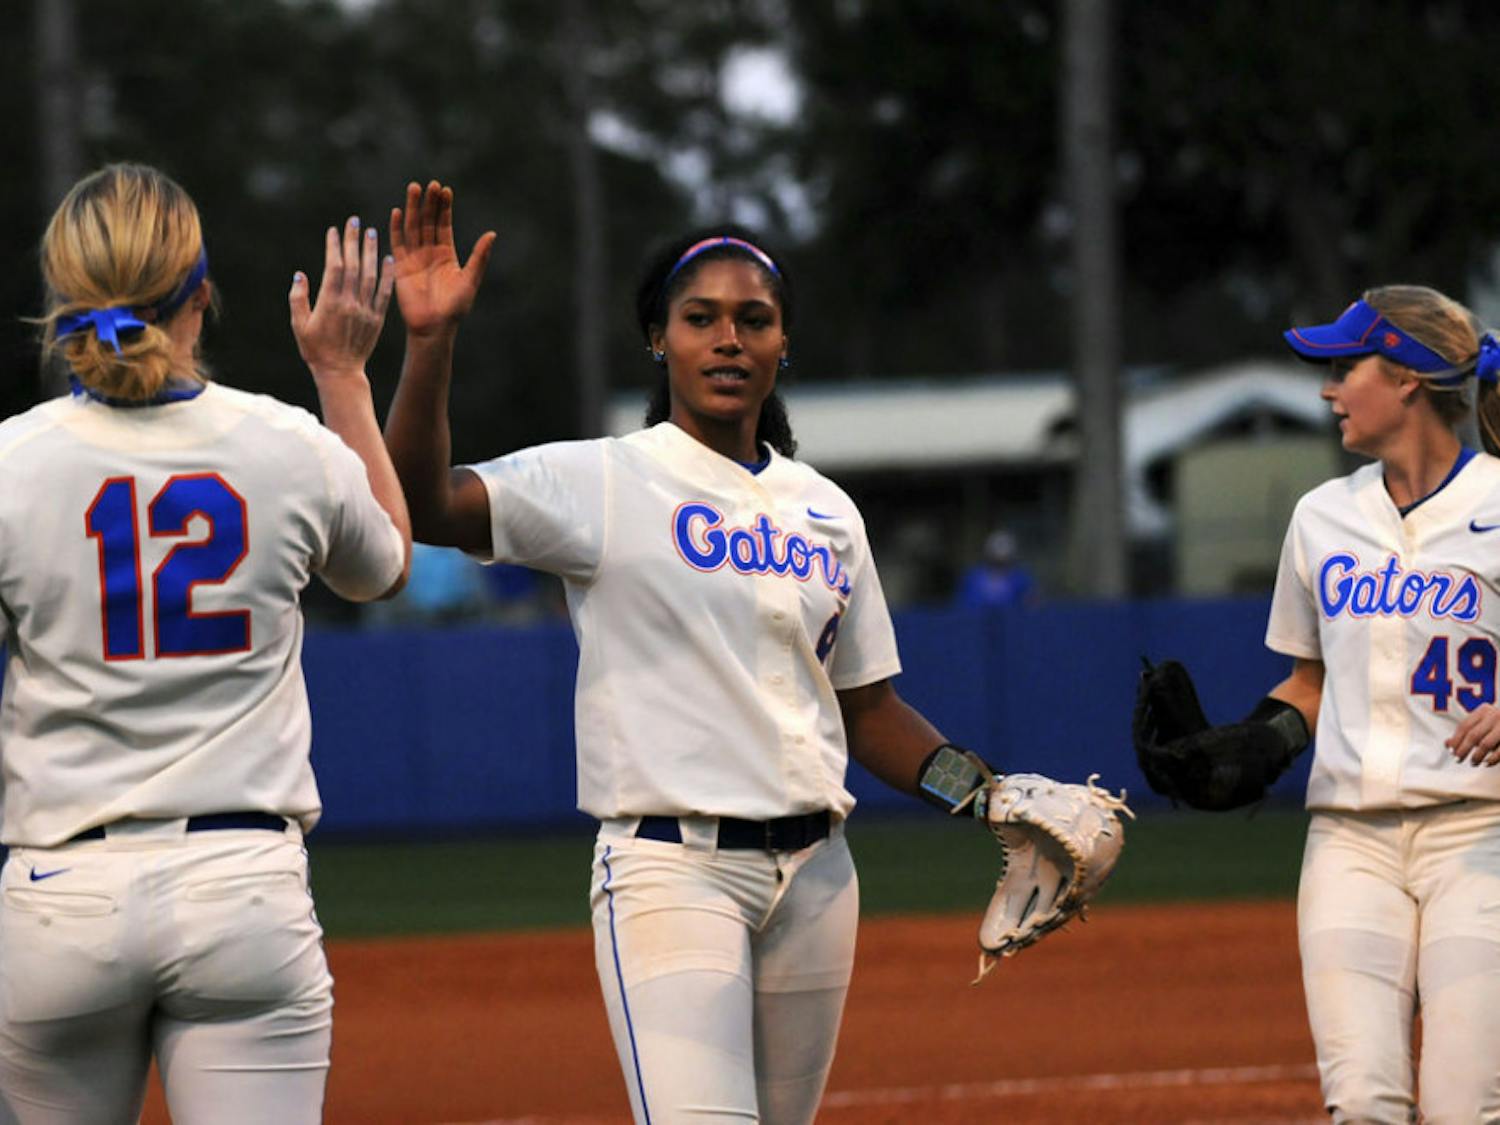 Aleshia Ocasio (middle) high fives a teammate during Florida's doubleheader sweep of Jacksonville on Feb. 17, 2016, at Katie Seashole Pressly Stadium.